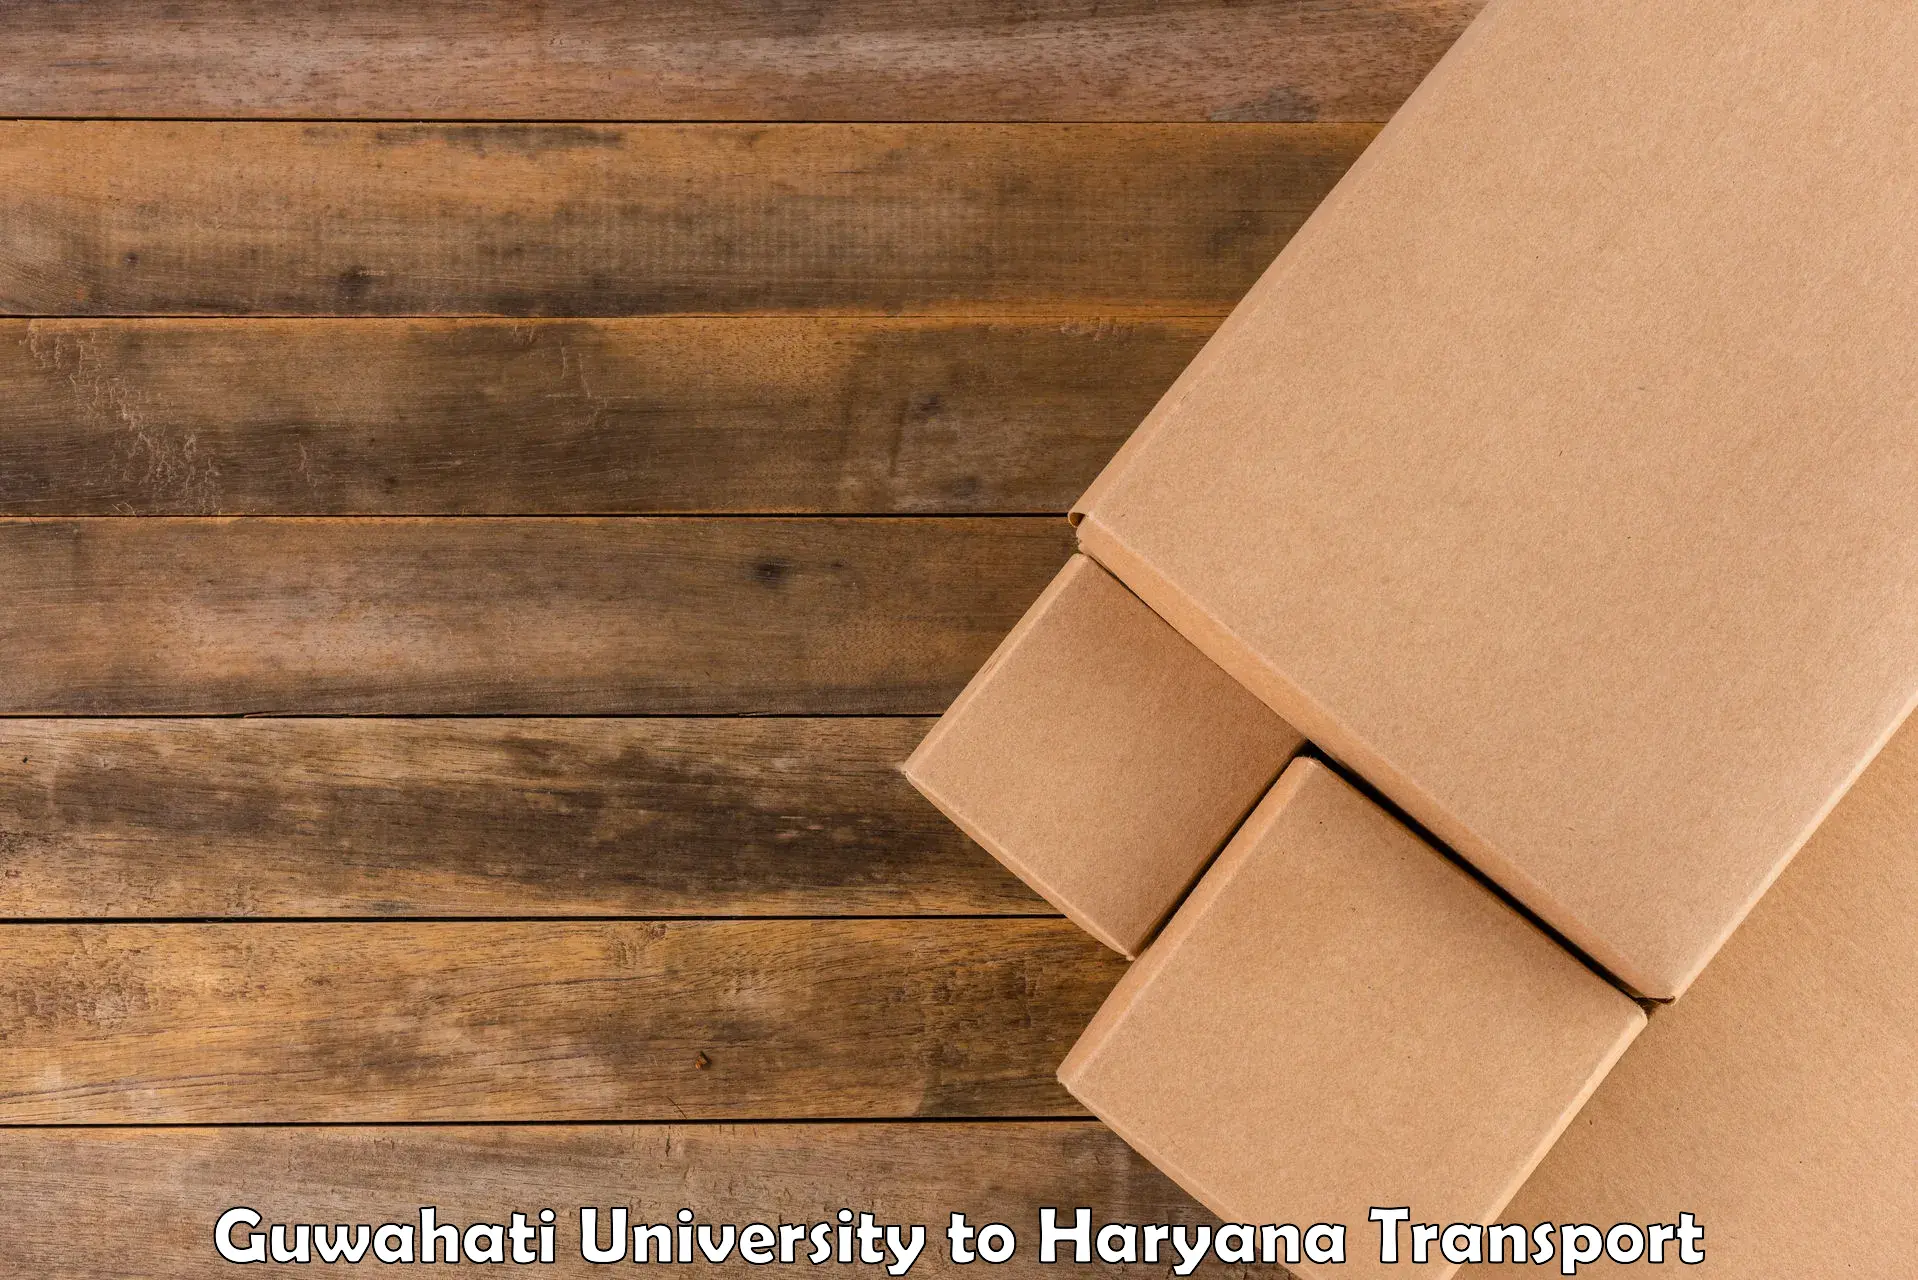 Cargo train transport services Guwahati University to Palwal